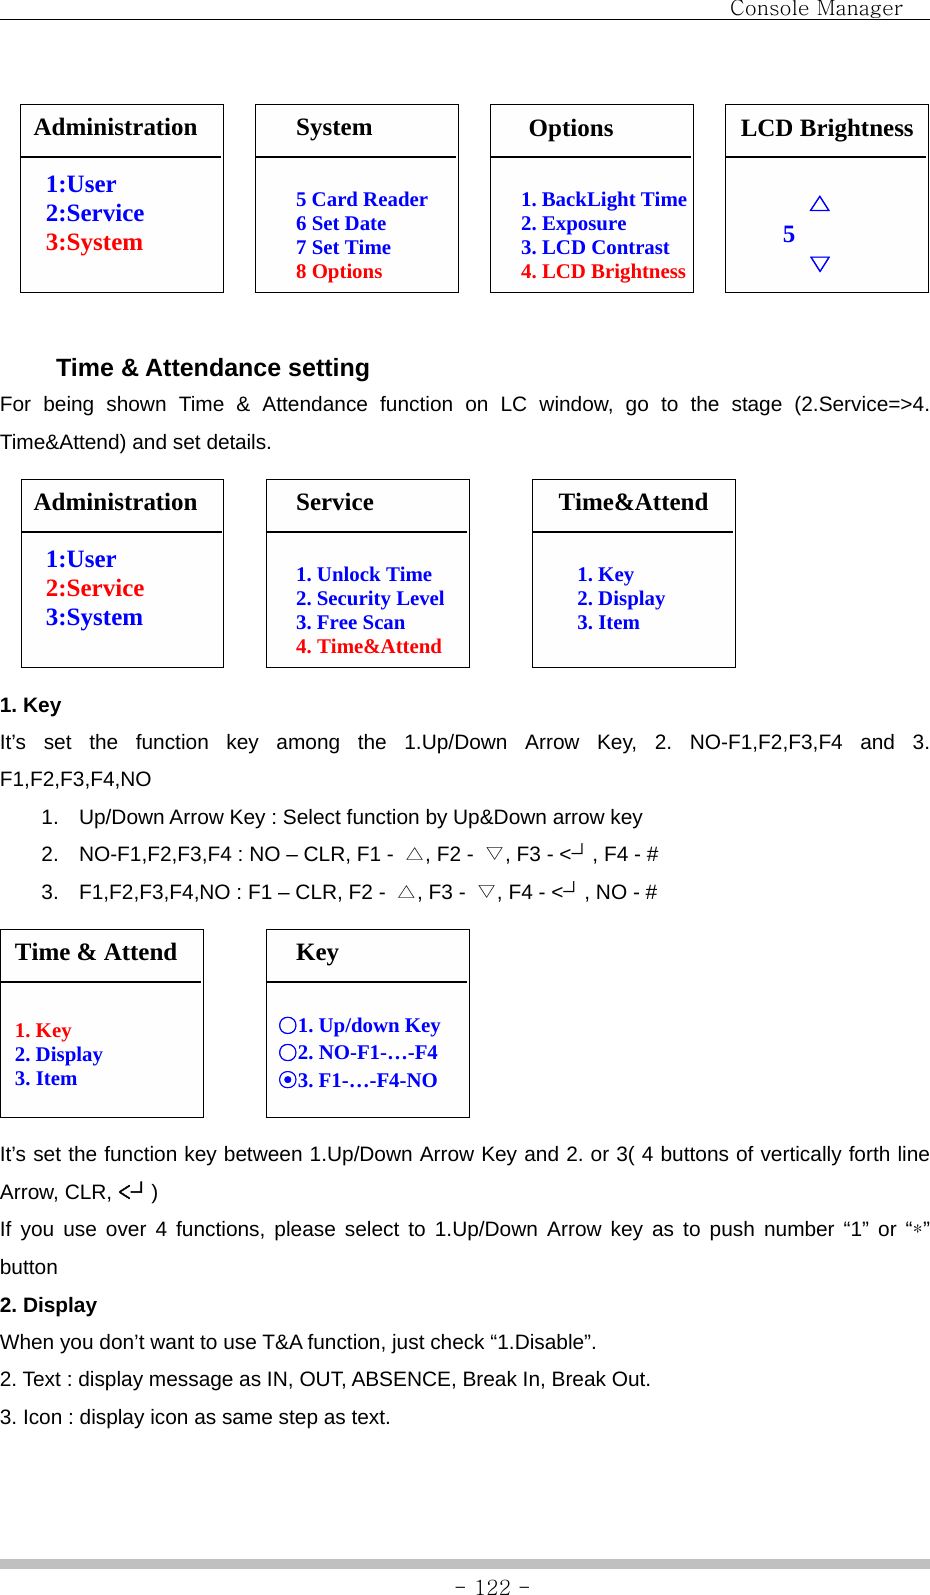                                Console Manager               - 122 -                 Time &amp; Attendance setting For being shown Time &amp; Attendance function on LC window, go to the stage (2.Service=&gt;4. Time&amp;Attend) and set details.                 1. Key   It’s set the function key among the 1.Up/Down Arrow Key, 2. NO-F1,F2,F3,F4 and 3. F1,F2,F3,F4,NO 1.  Up/Down Arrow Key : Select function by Up&amp;Down arrow key 2.  NO-F1,F2,F3,F4 : NO – CLR, F1 -  △, F2 -  ▽, F3 - &lt;┘, F4 - # 3.  F1,F2,F3,F4,NO : F1 – CLR, F2 -  △, F3 -  ▽, F4 - &lt;┘, NO - #         It’s set the function key between 1.Up/Down Arrow Key and 2. or 3( 4 buttons of vertically forth line Arrow, CLR, &lt;┘) If you use over 4 functions, please select to 1.Up/Down Arrow key as to push number “1” or “*” button 2. Display When you don’t want to use T&amp;A function, just check “1.Disable”.   2. Text : display message as IN, OUT, ABSENCE, Break In, Break Out. 3. Icon : display icon as same step as text. 1. Unlock Time 2. Security Level 3. Free Scan 4. Time&amp;Attend Administration  1:User 2:Service 3:System   Service Time&amp;Attend 1. Key 2. Display 3. Item Time &amp; Attend   1. Key 2. Display 3. Item Key ○1. Up/down Key ○2. NO-F1-…-F4 ⊙3. F1-…-F4-NO     △ 5      ▽ 5 Card Reader 6 Set Date 7 Set Time 8 Options Administration  1:User 2:Service 3:System   System  LCD Brightness 1. BackLight Time 2. Exposure 3. LCD Contrast 4. LCD Brightness Options 